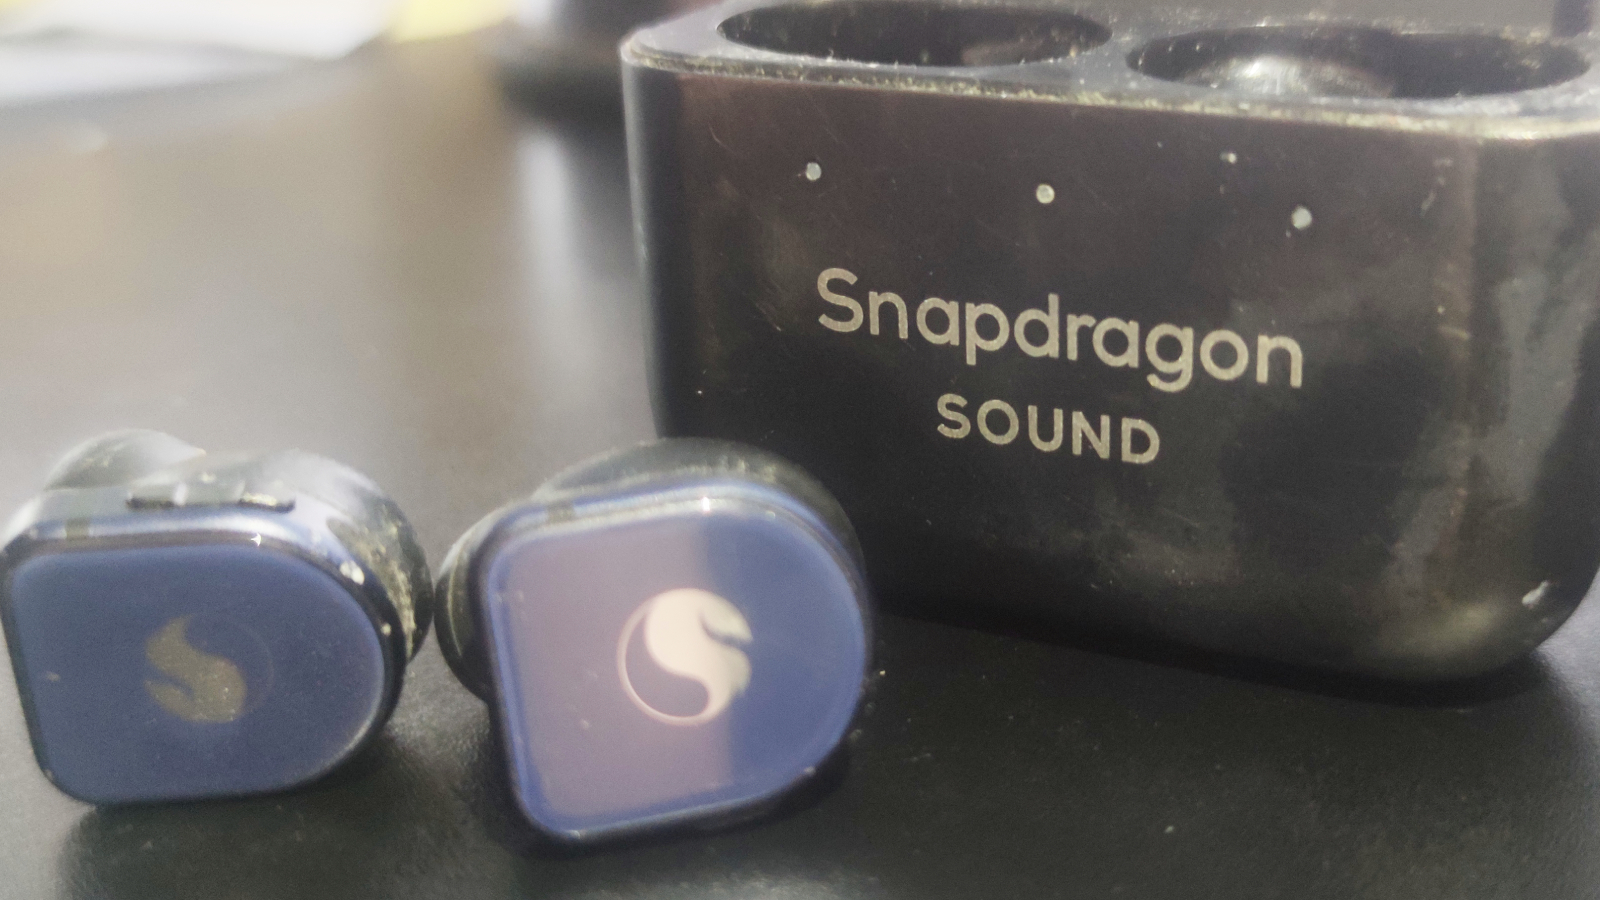 A pair of headphones with the Snapdragon Sound logo.